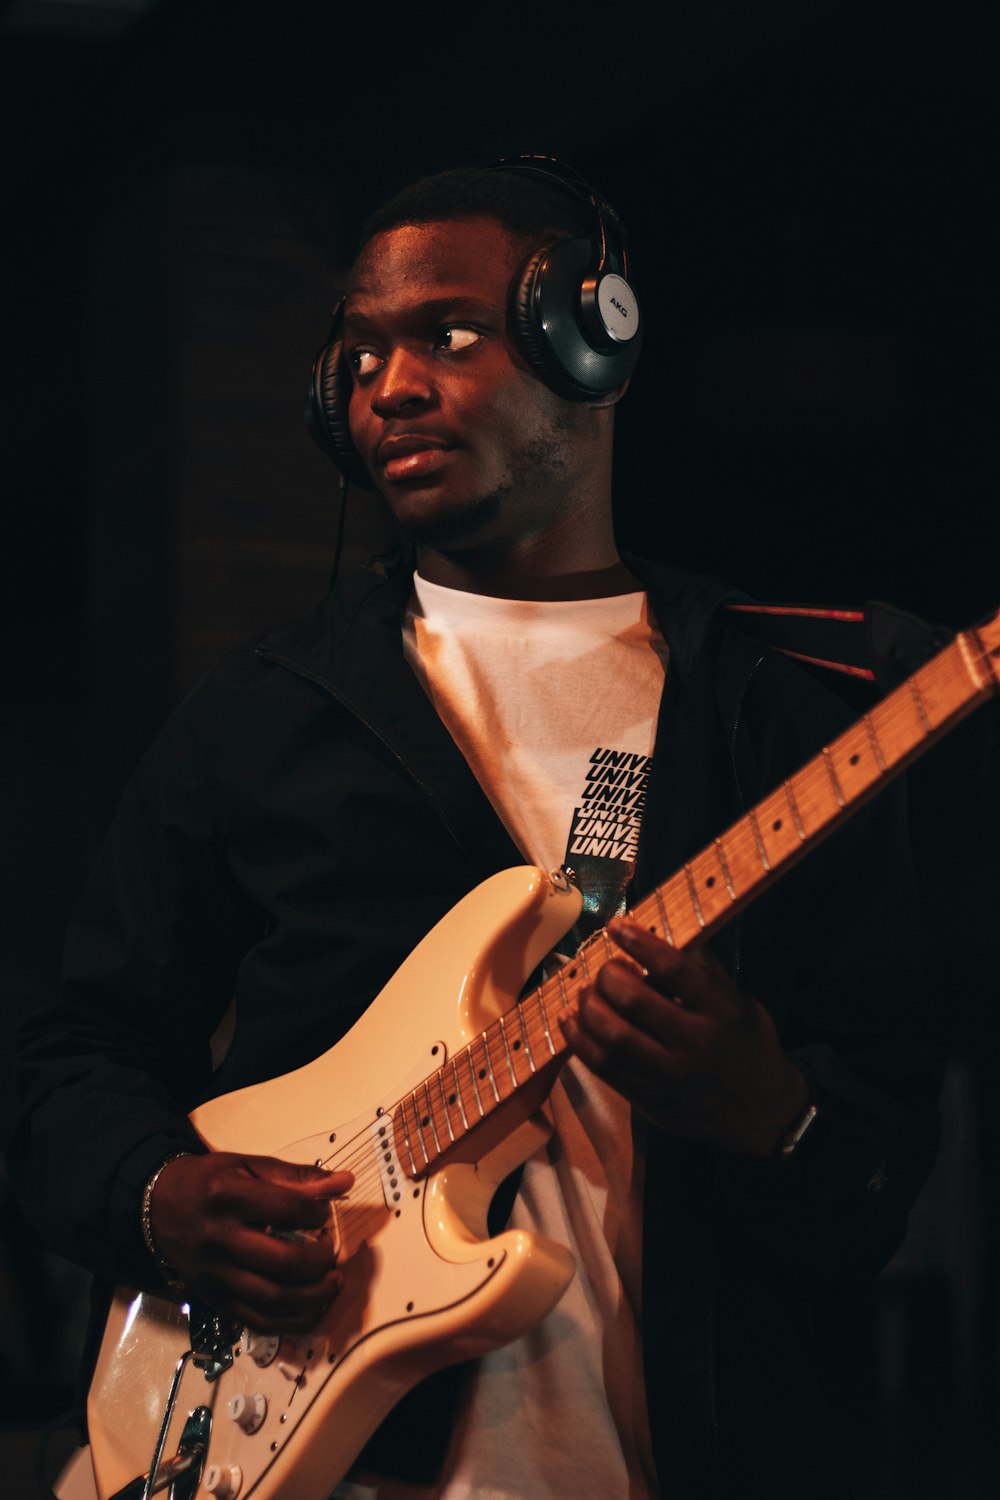 a man wearing headphones and playing a guitar